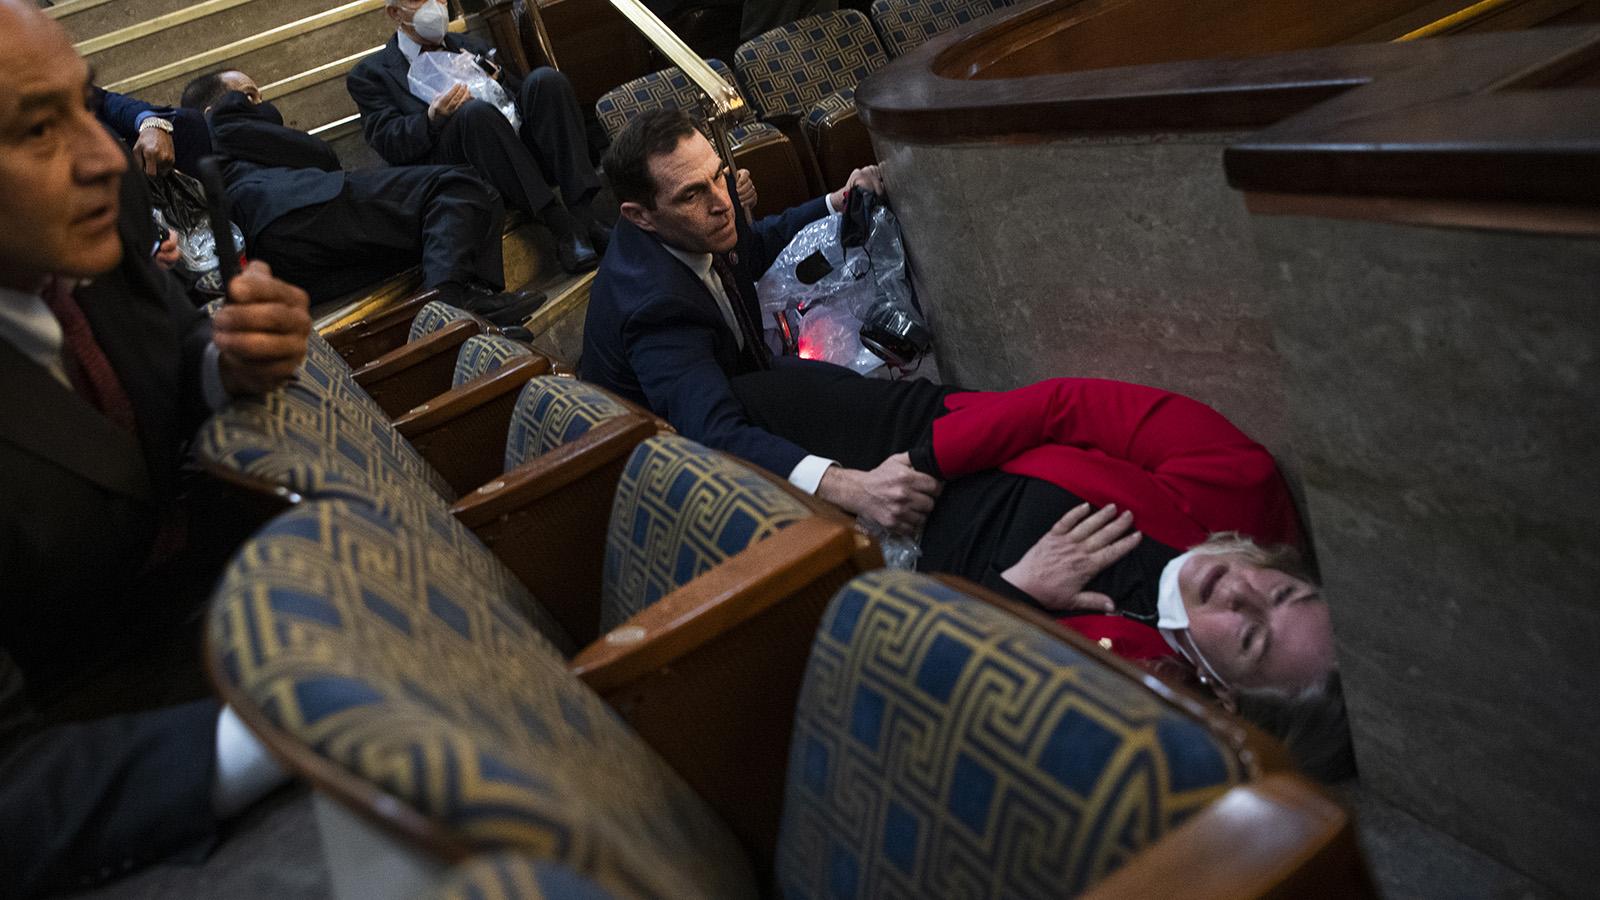 Rep. Jason Crow comforts Rep. Susan Wild while taking cover as protesters disrupt the joint session of Congress to certify the Electoral College vote on Jan. 6, 2021.